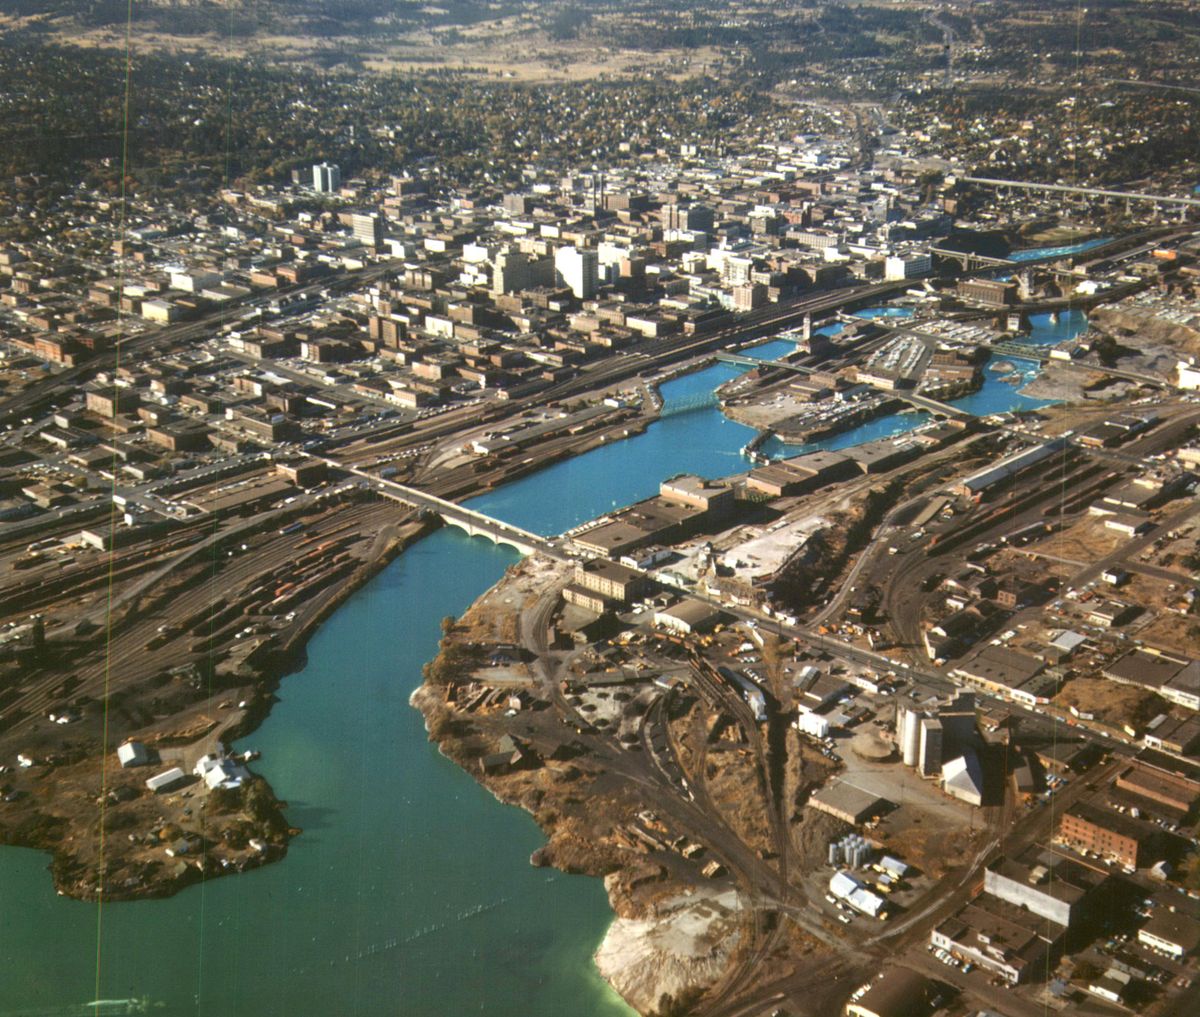 1960s - This aerial from before Expo 74 shows the downtown Spokane River at its most industrialized, dedicated to railyards, factories and warehouses. In the wake of the world’s fair, industrial uses were replaced with Riverfront Park, hotels, restaurants, businesses and the University District where the region’s universities come together in a high tech environment. (SPOKESMAN-REVIEW PHOTO ARCHIVE / SR)